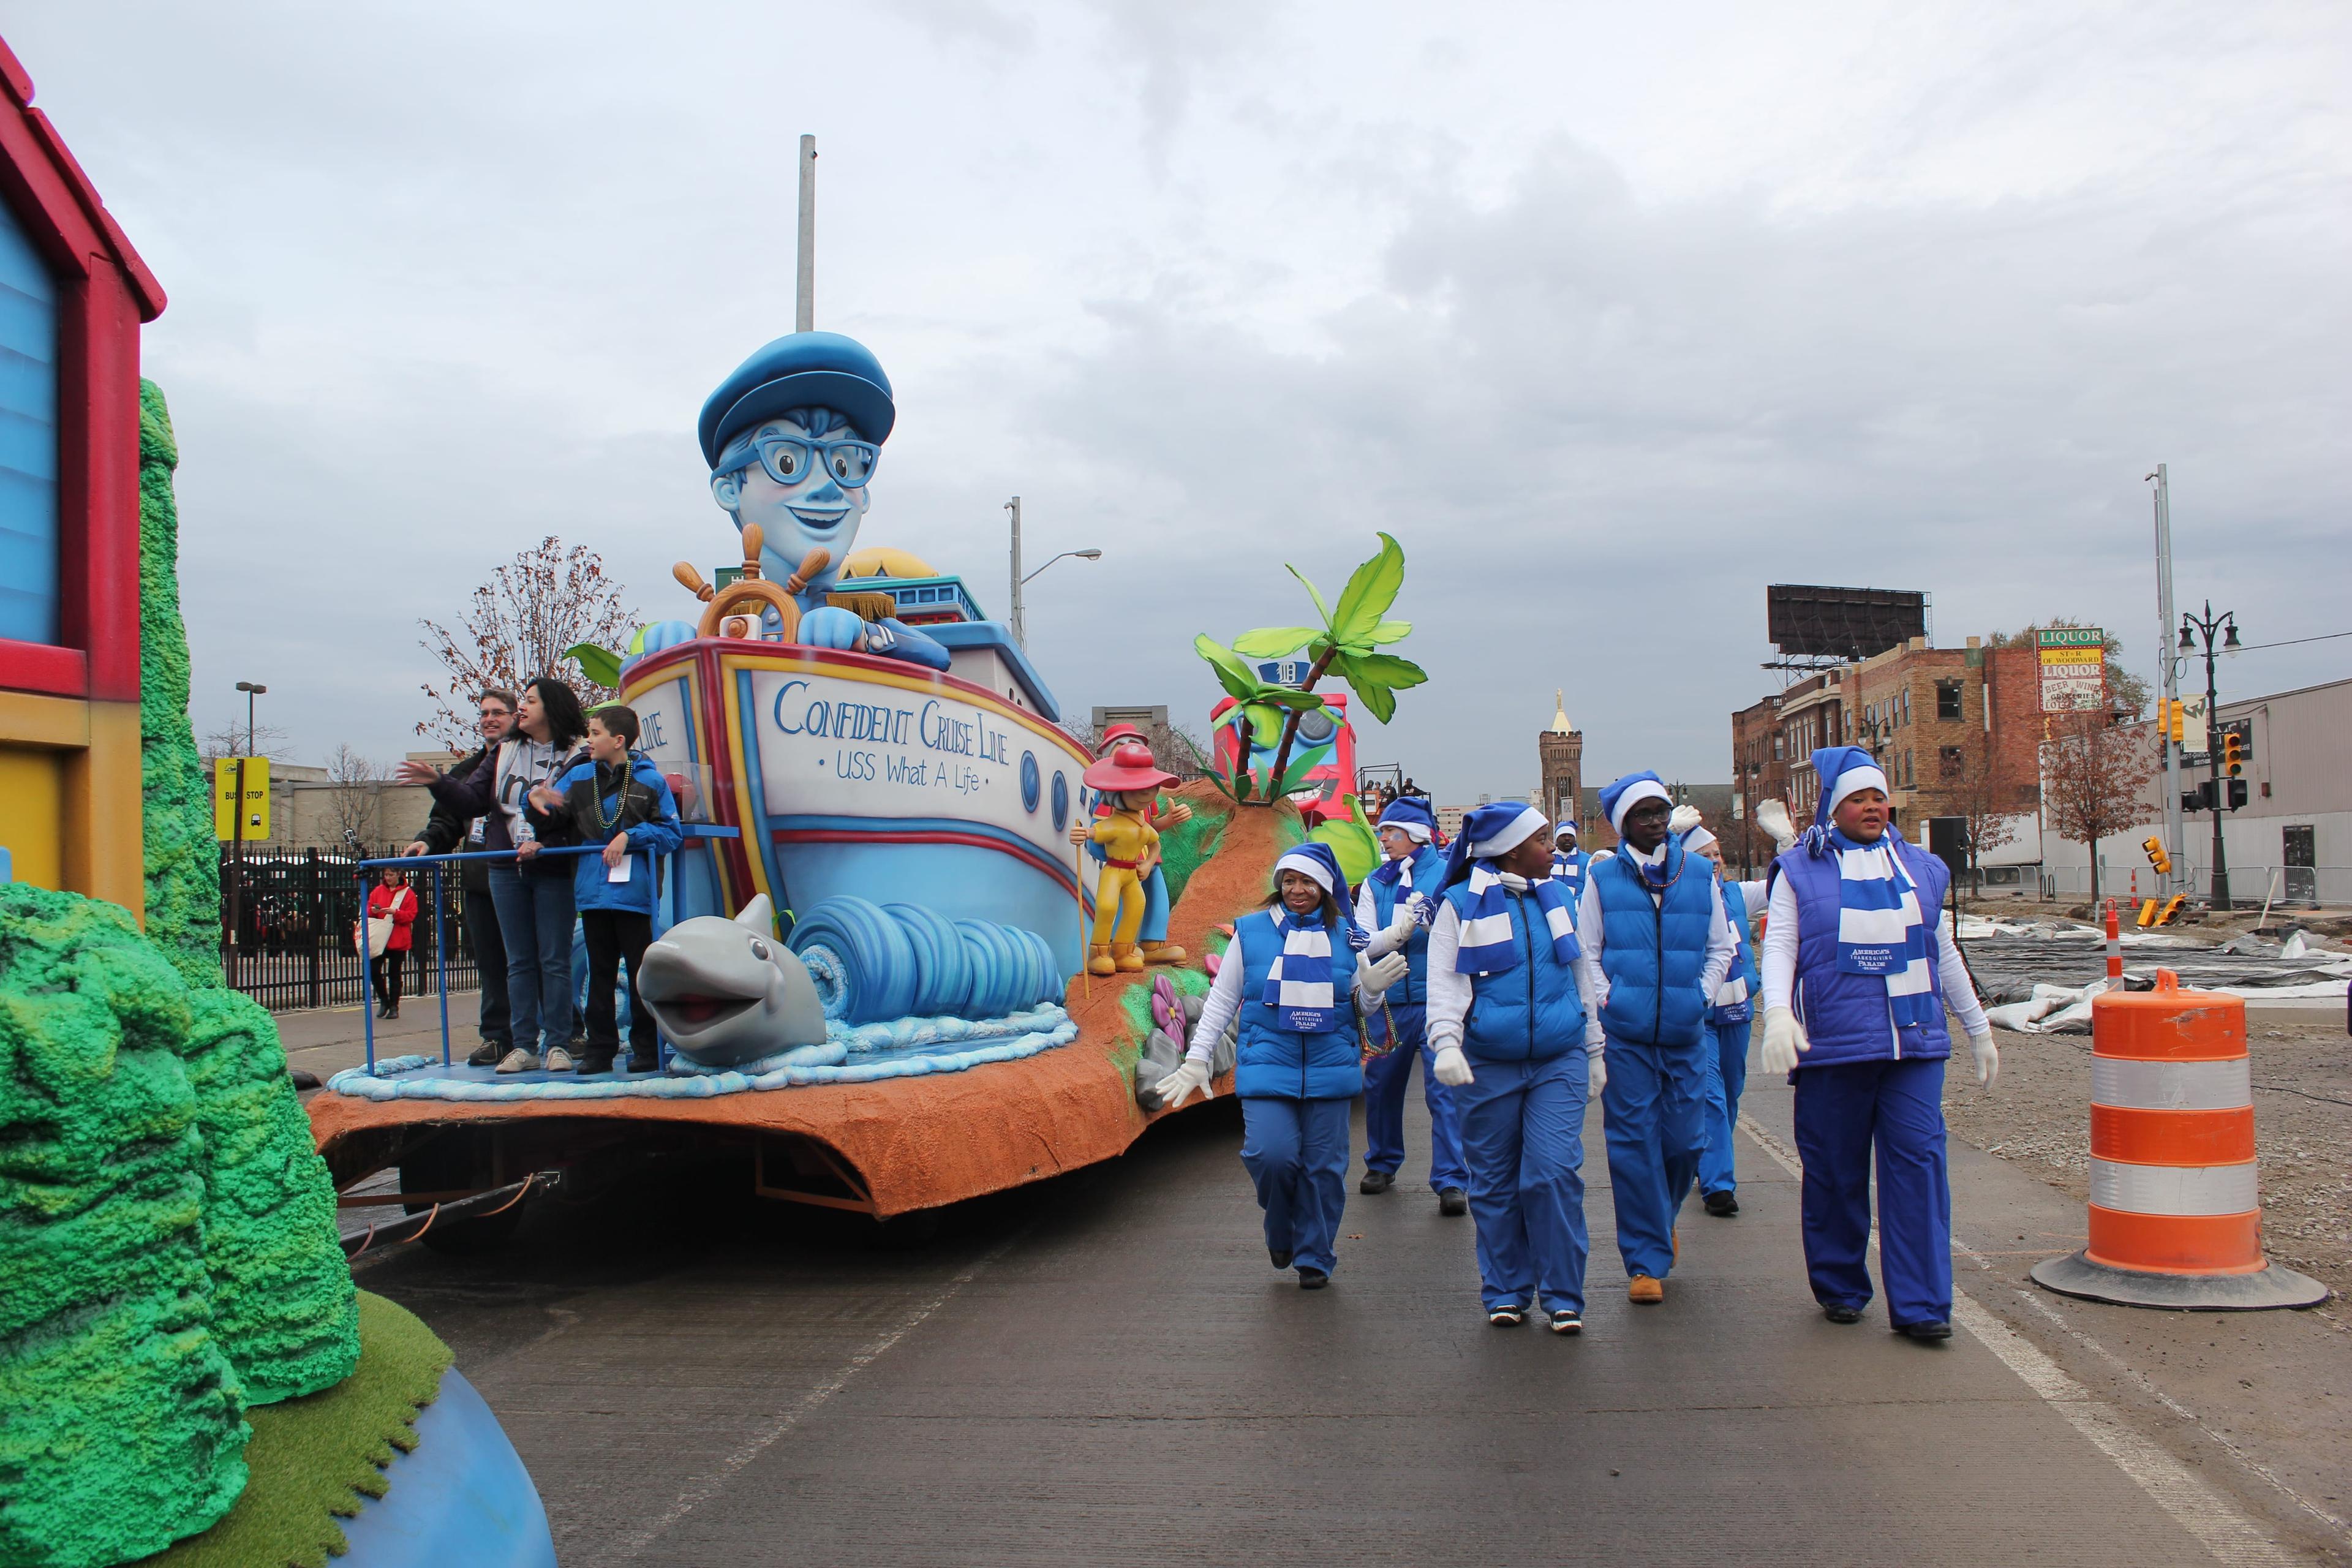 Blue Cross float in the Thanksgiving parade